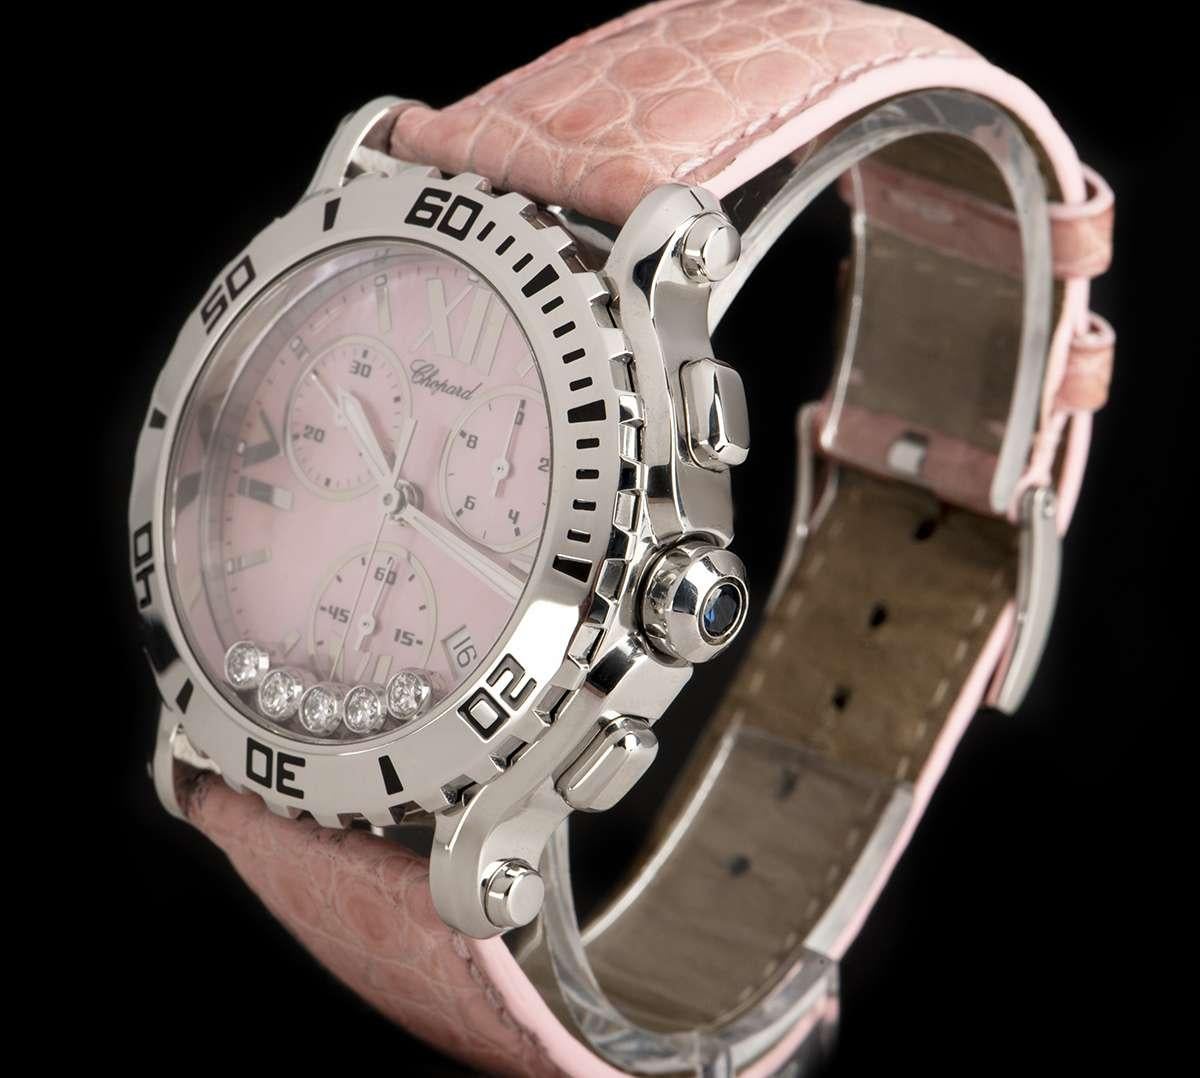 A Stainless Steel Happy Sport Chronograph Ladies Wristwatch, pink mother of pearl dial with applied hour markers and applied roman numerals III, VI, IX and XII, hour recorder at 2 0'clock, date between 4 and 5 0'clock, small seconds at 6 0'clock, 30